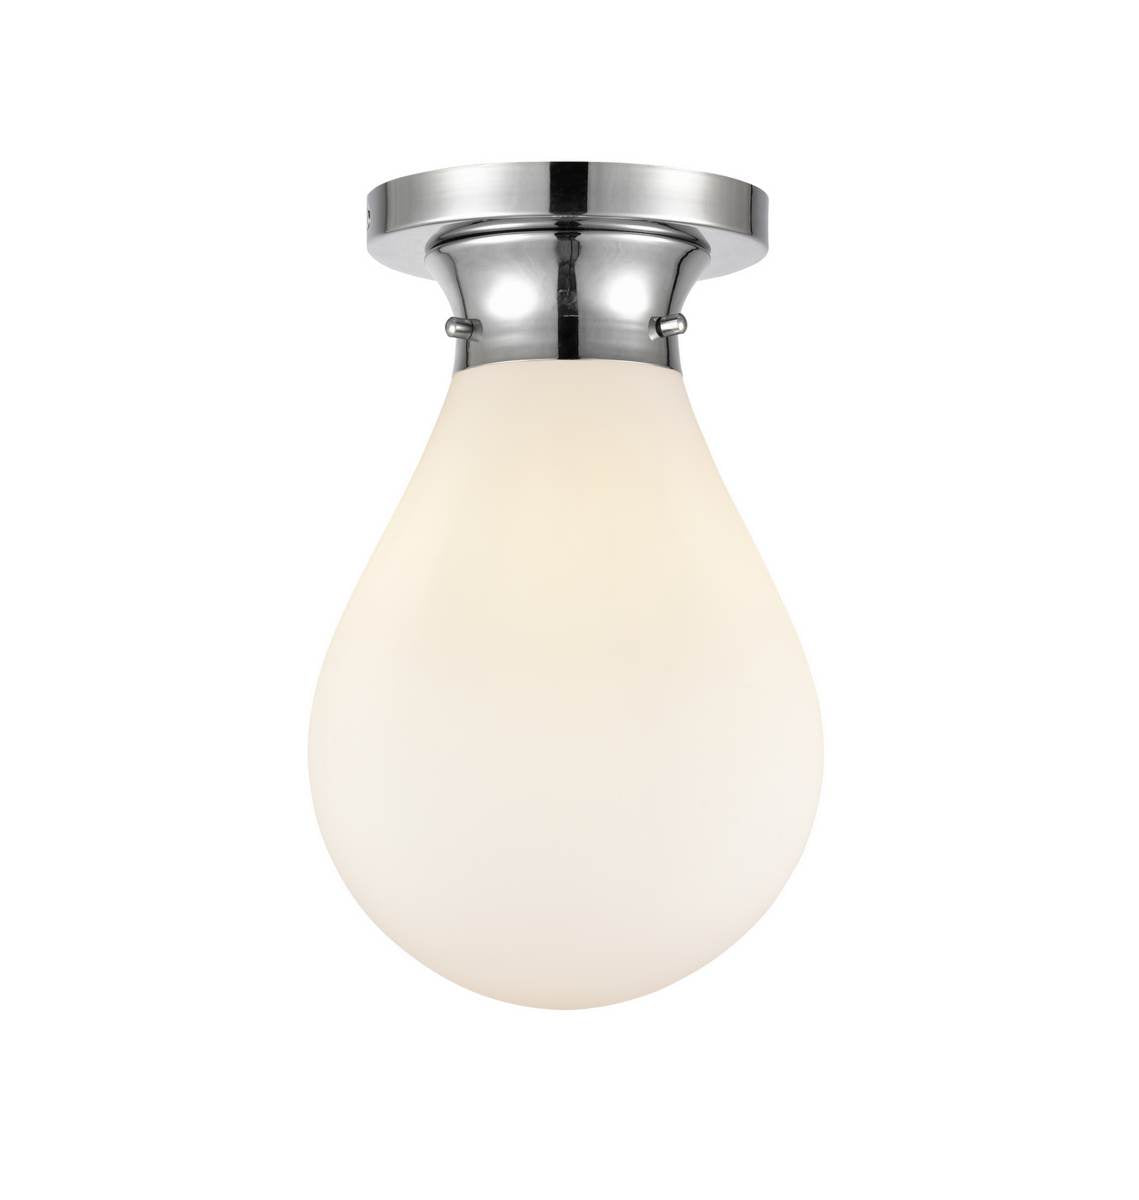 1-Light 7.875" Polished Chrome Flush Mount - White Genesis Glass Glass Shade - Incandescent Bulb Included